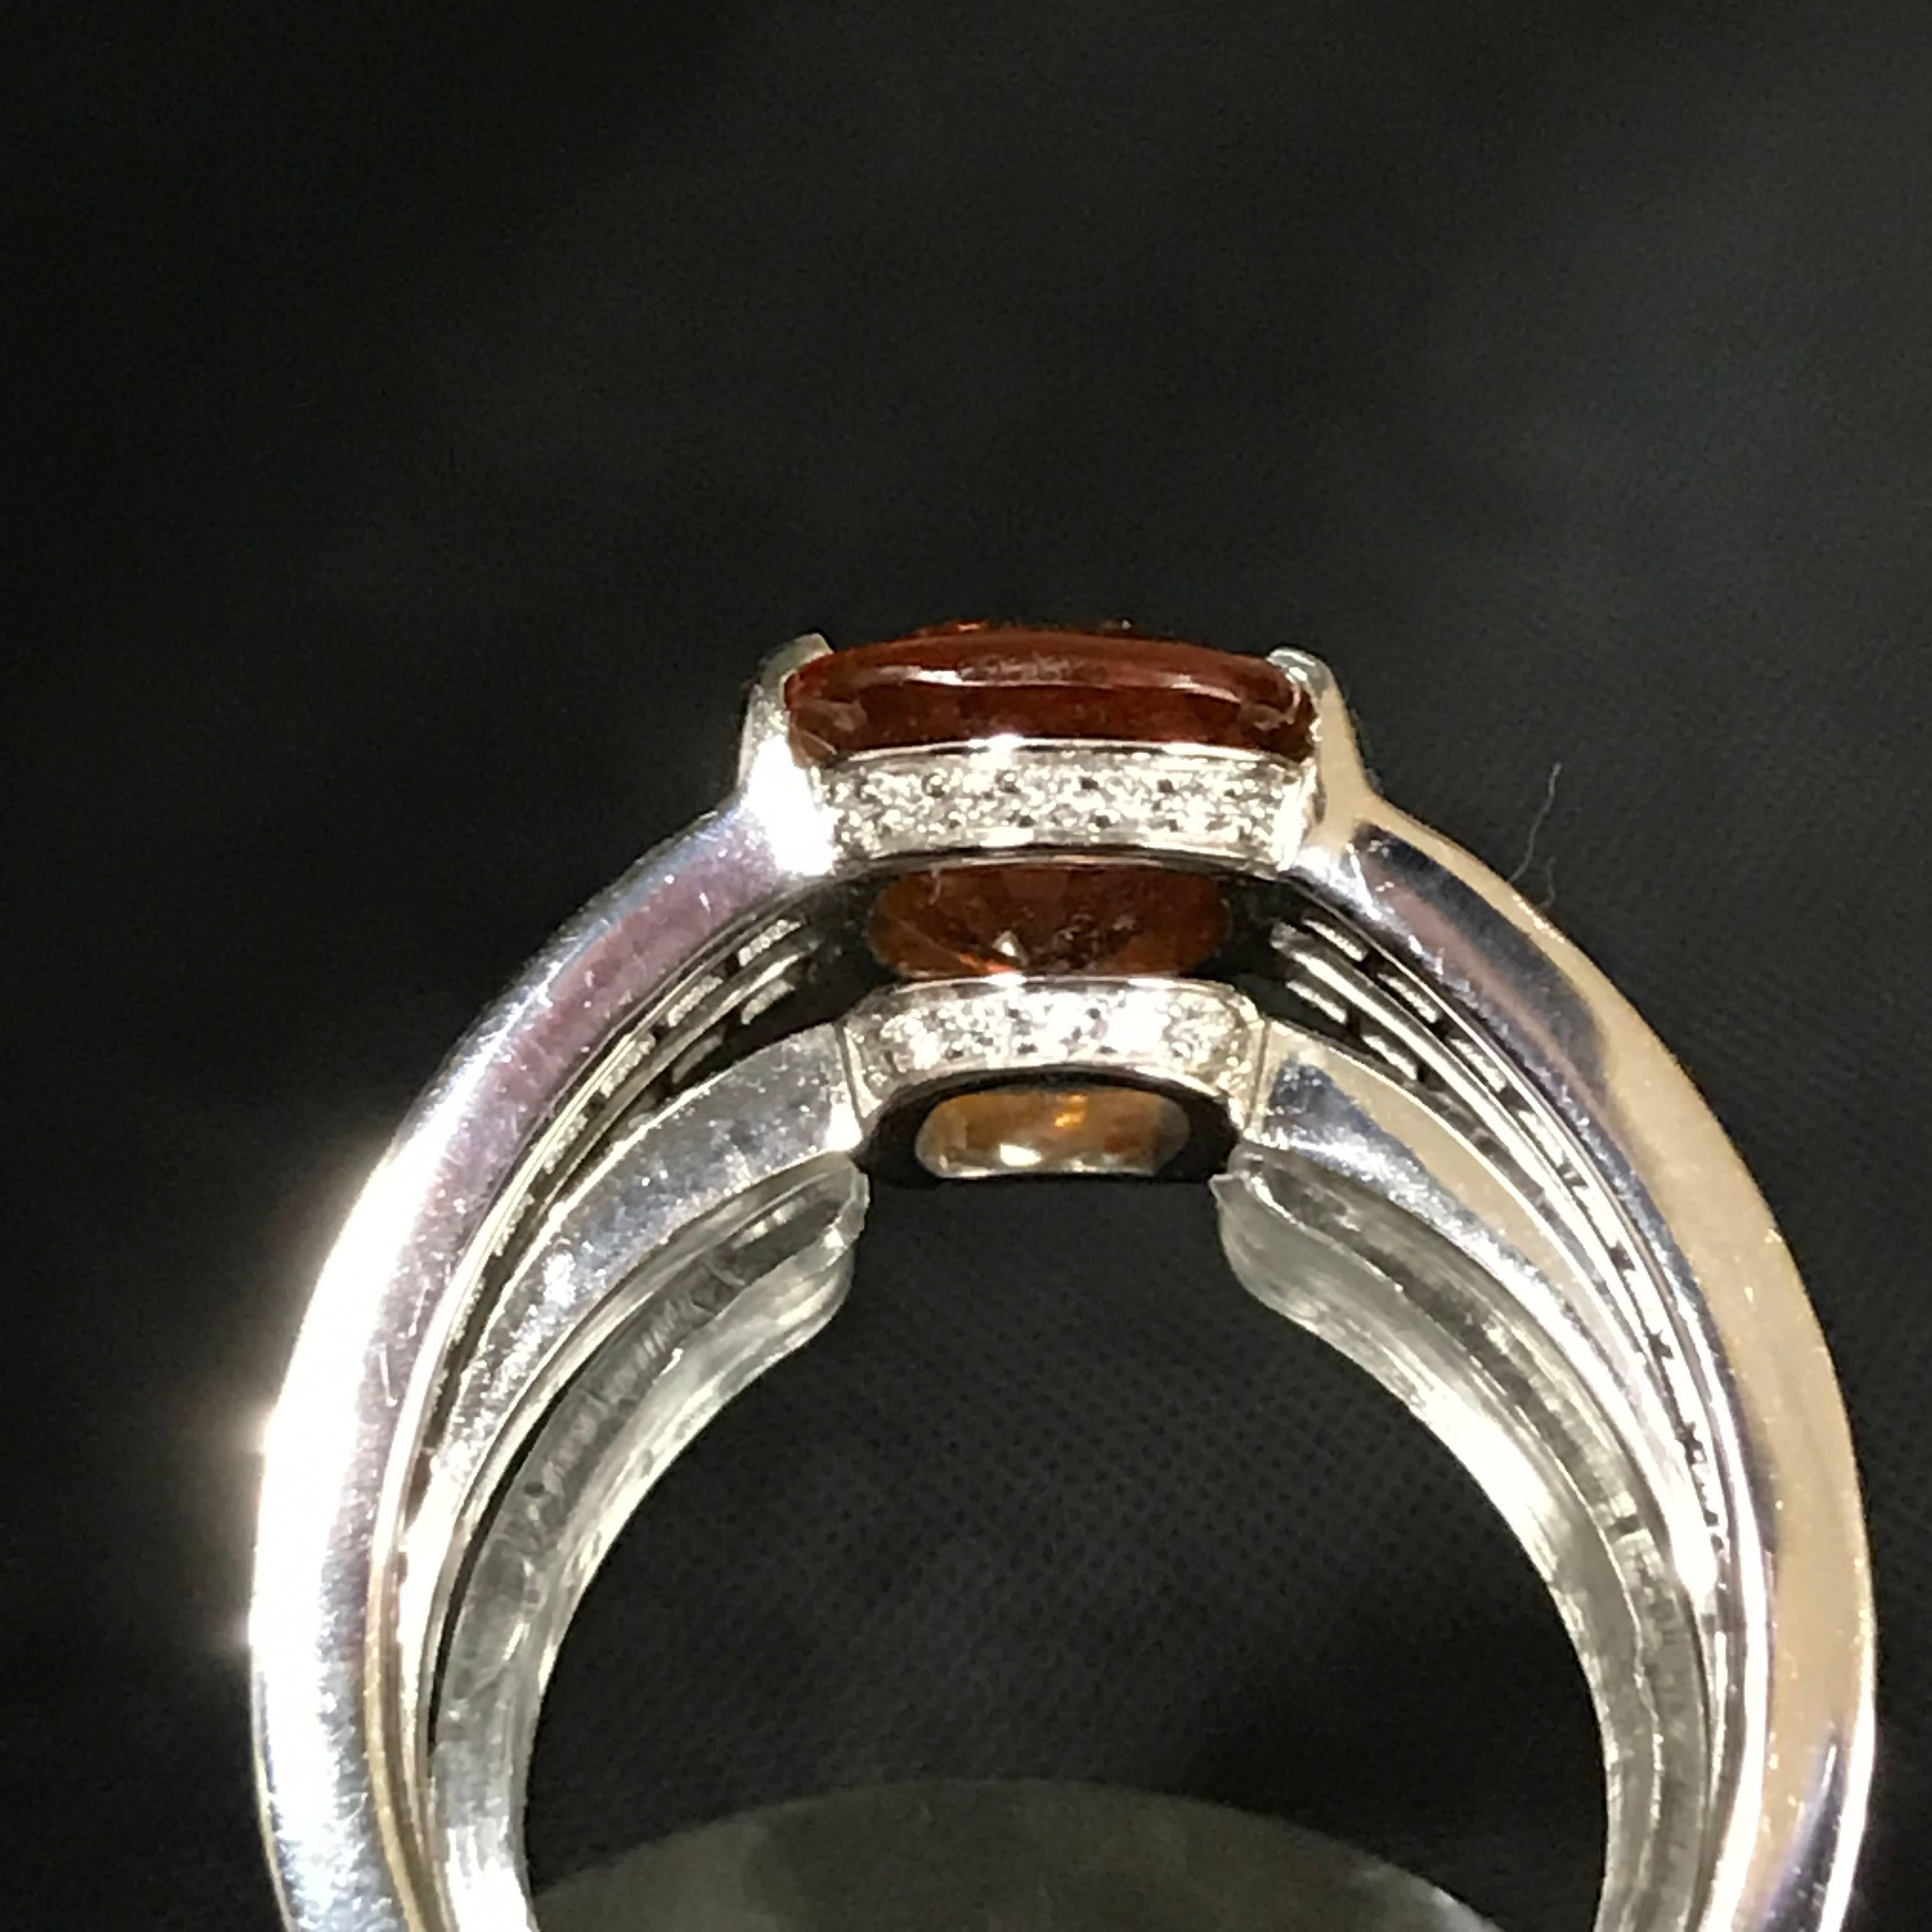 Modern Orange Sapphire Diamonds and White Gold Ring with a Certificate.